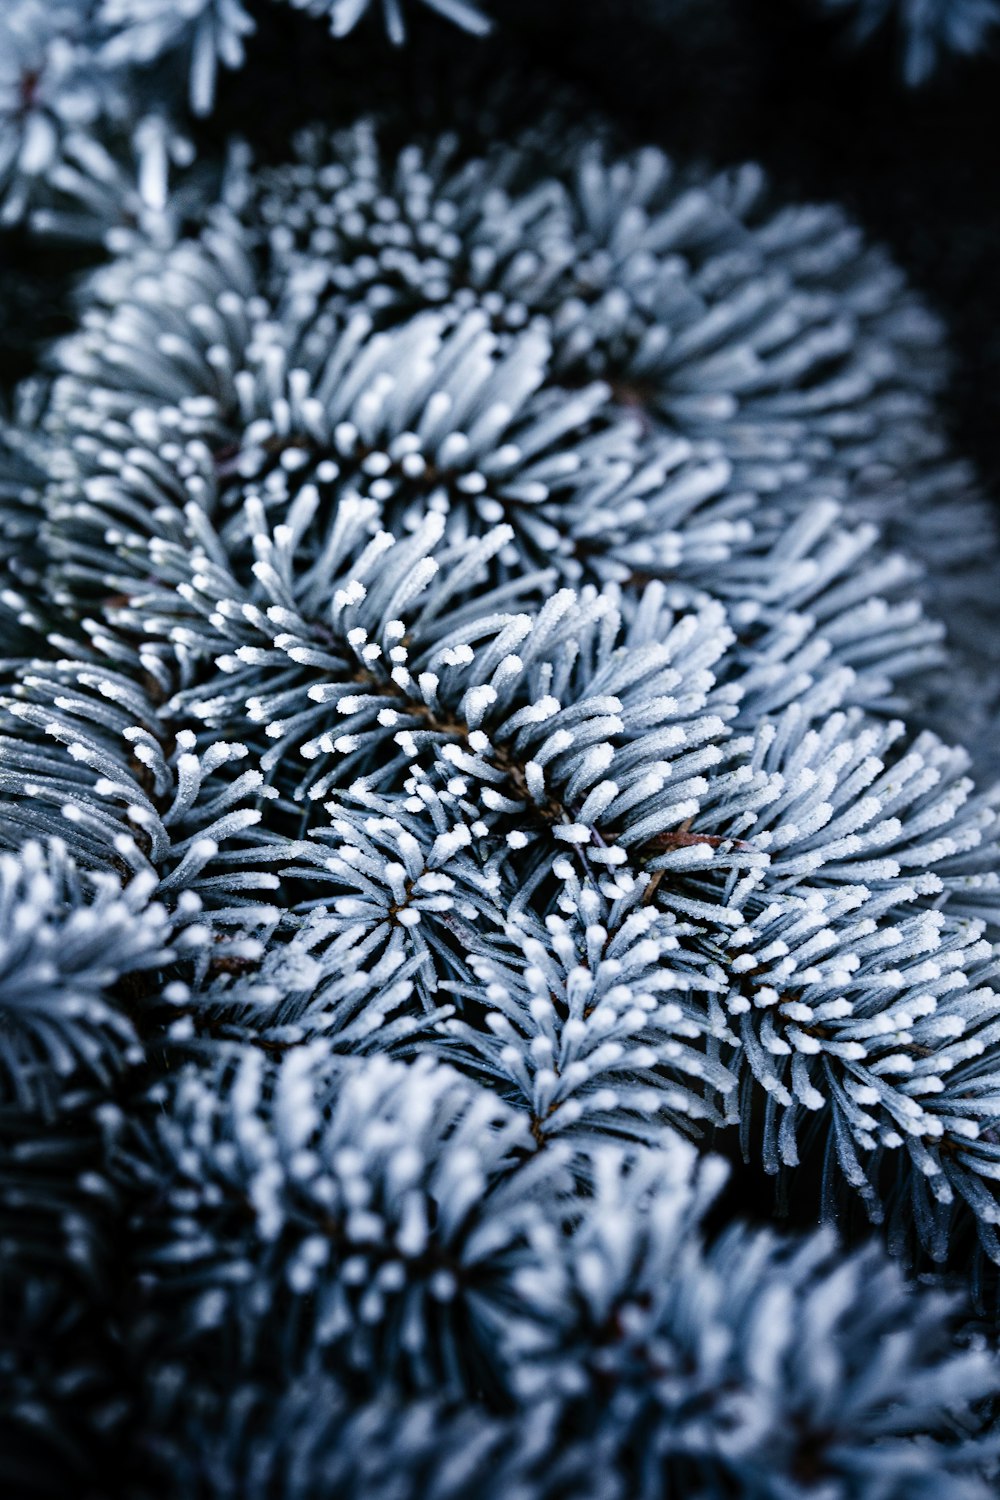 a close up of a bunch of pine needles